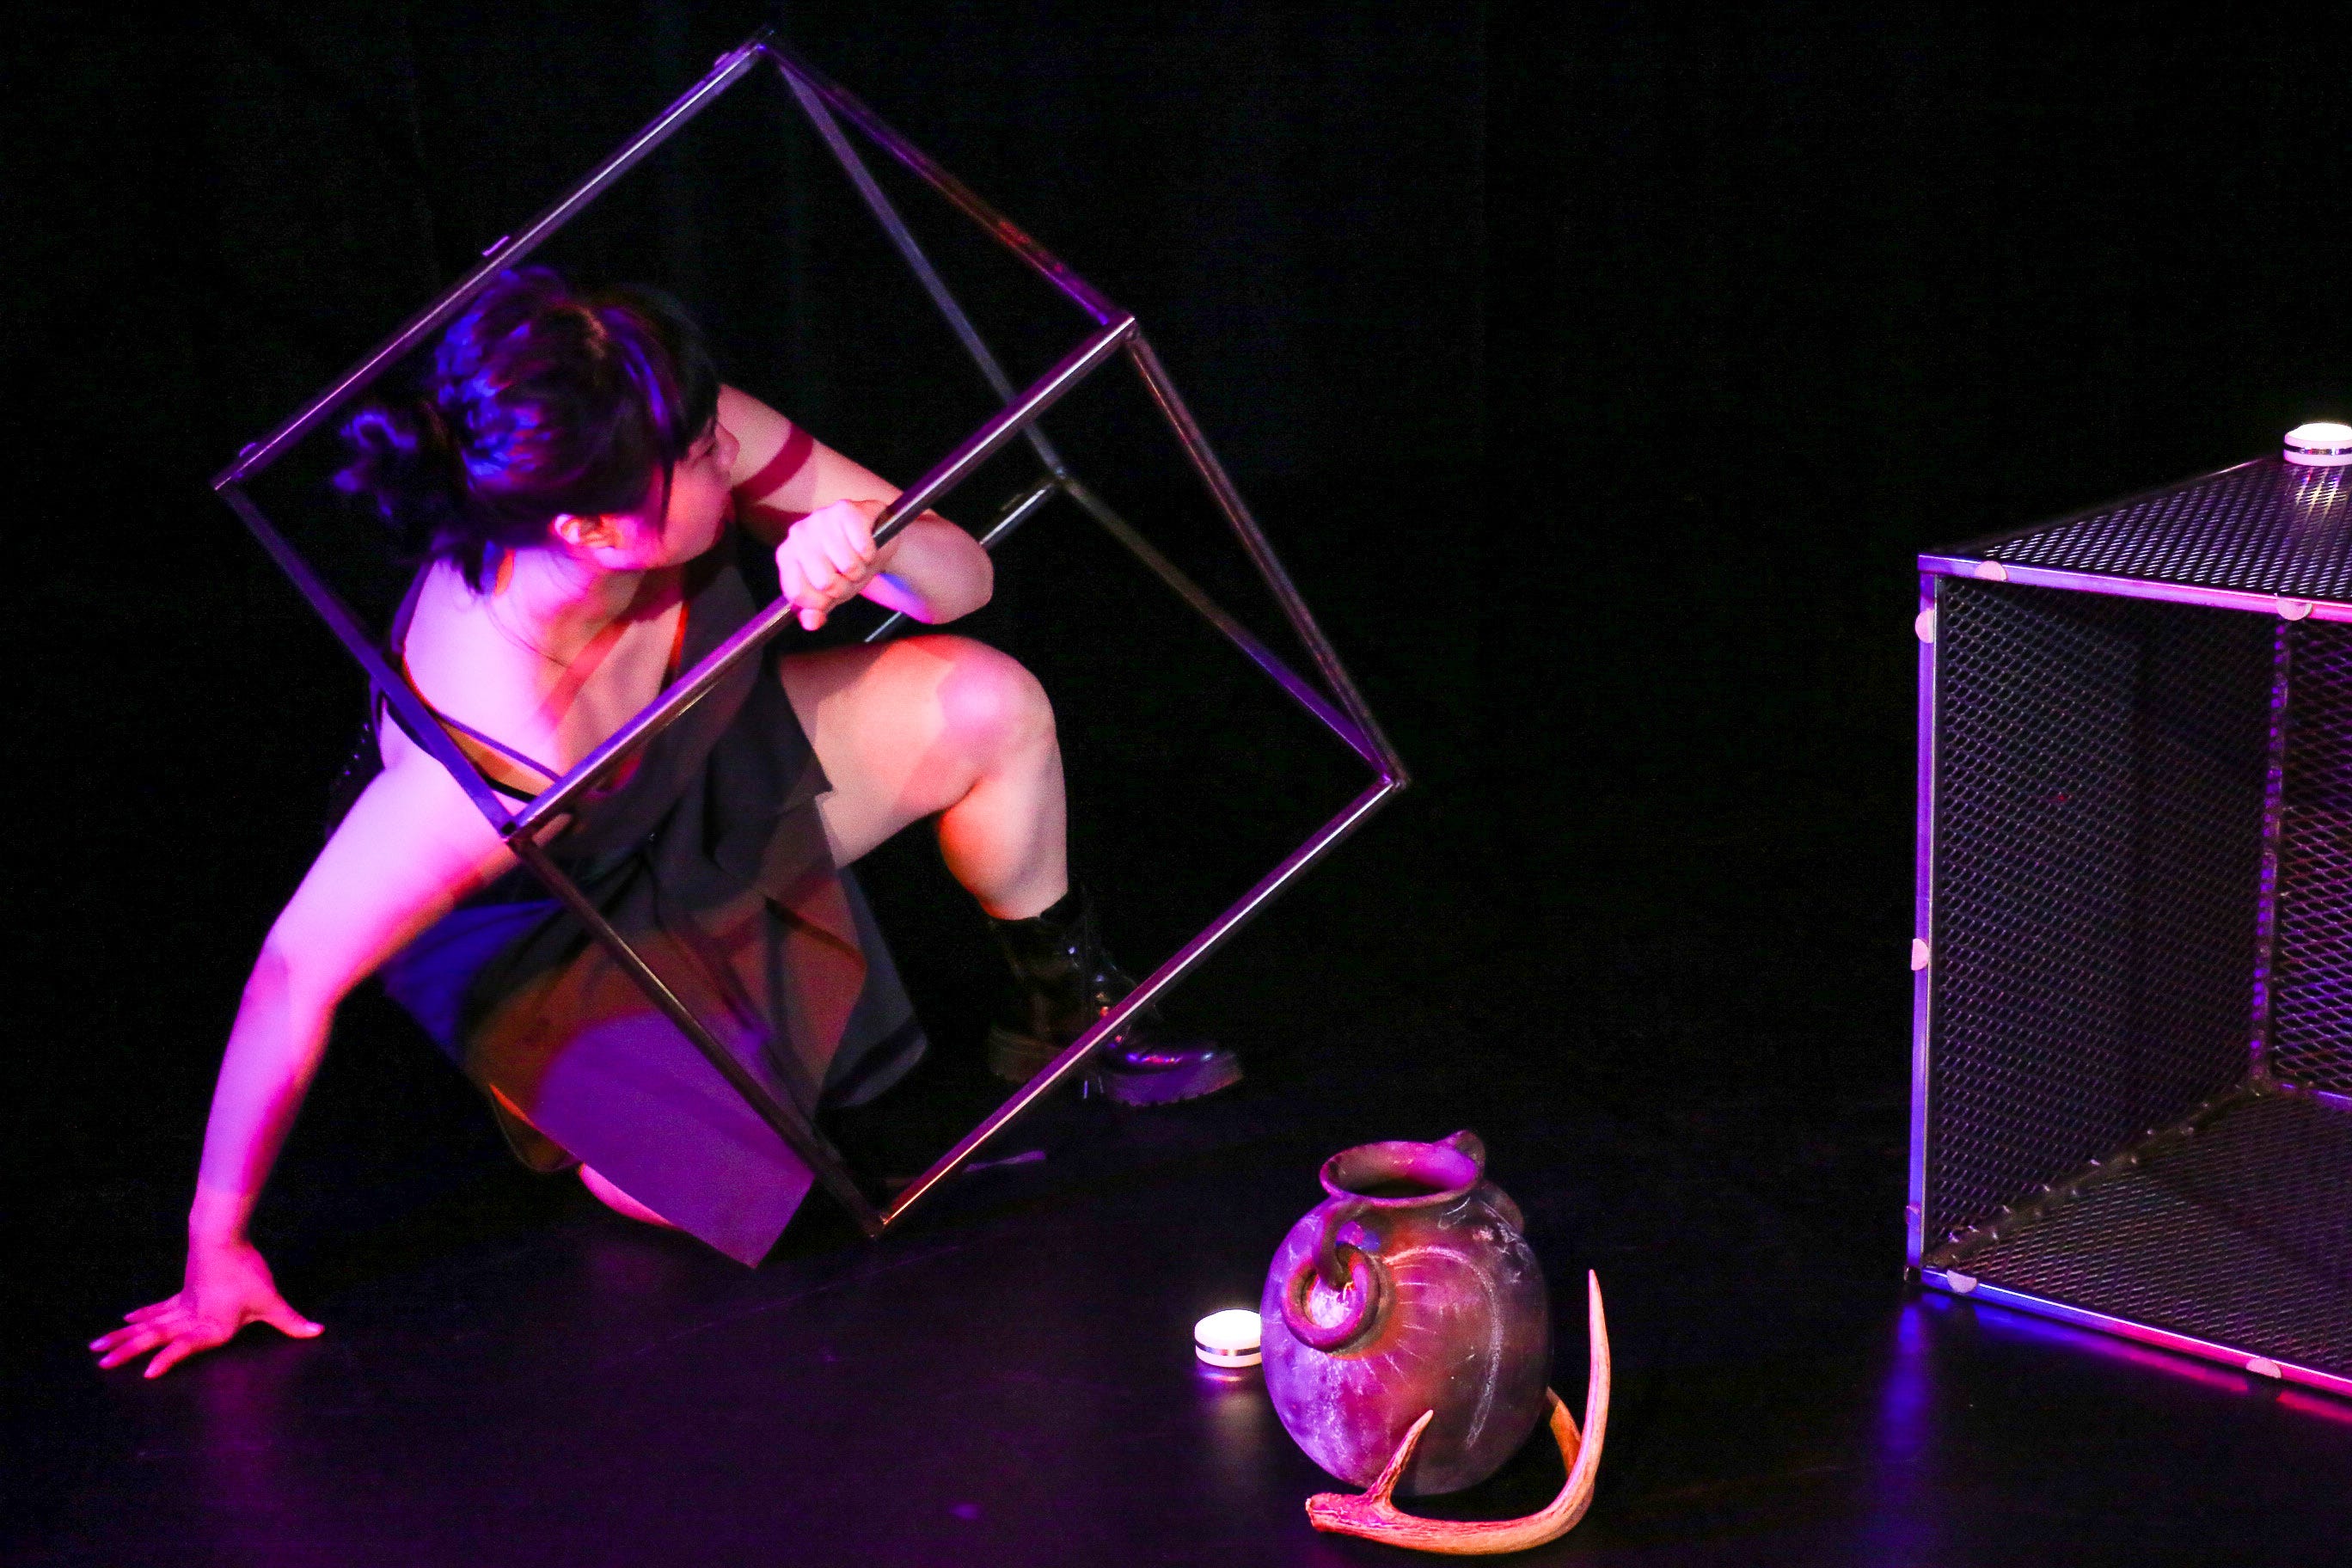 A young woman, Yitong Chen, is off-center in a metal frame of a box. Other objects are in the space including a mesh metal box, solar lighting elements, a dear antler and a ceramic jug.